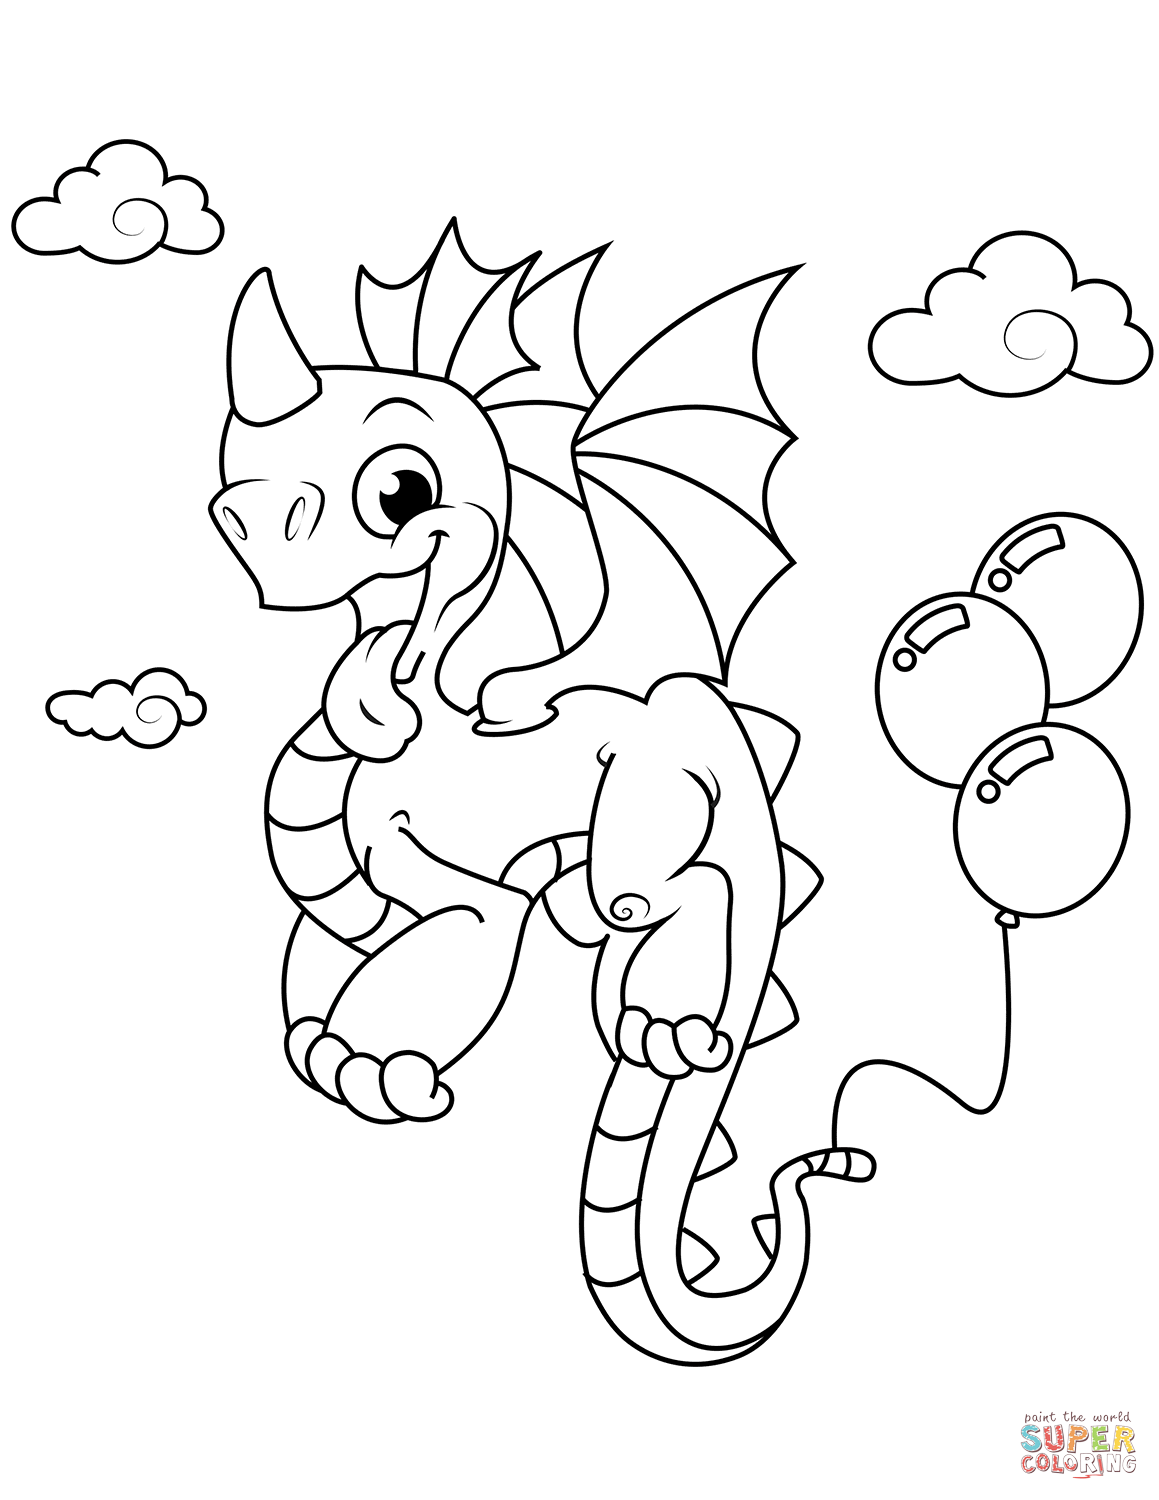 cute baby dragons from dragonvale coloring pages